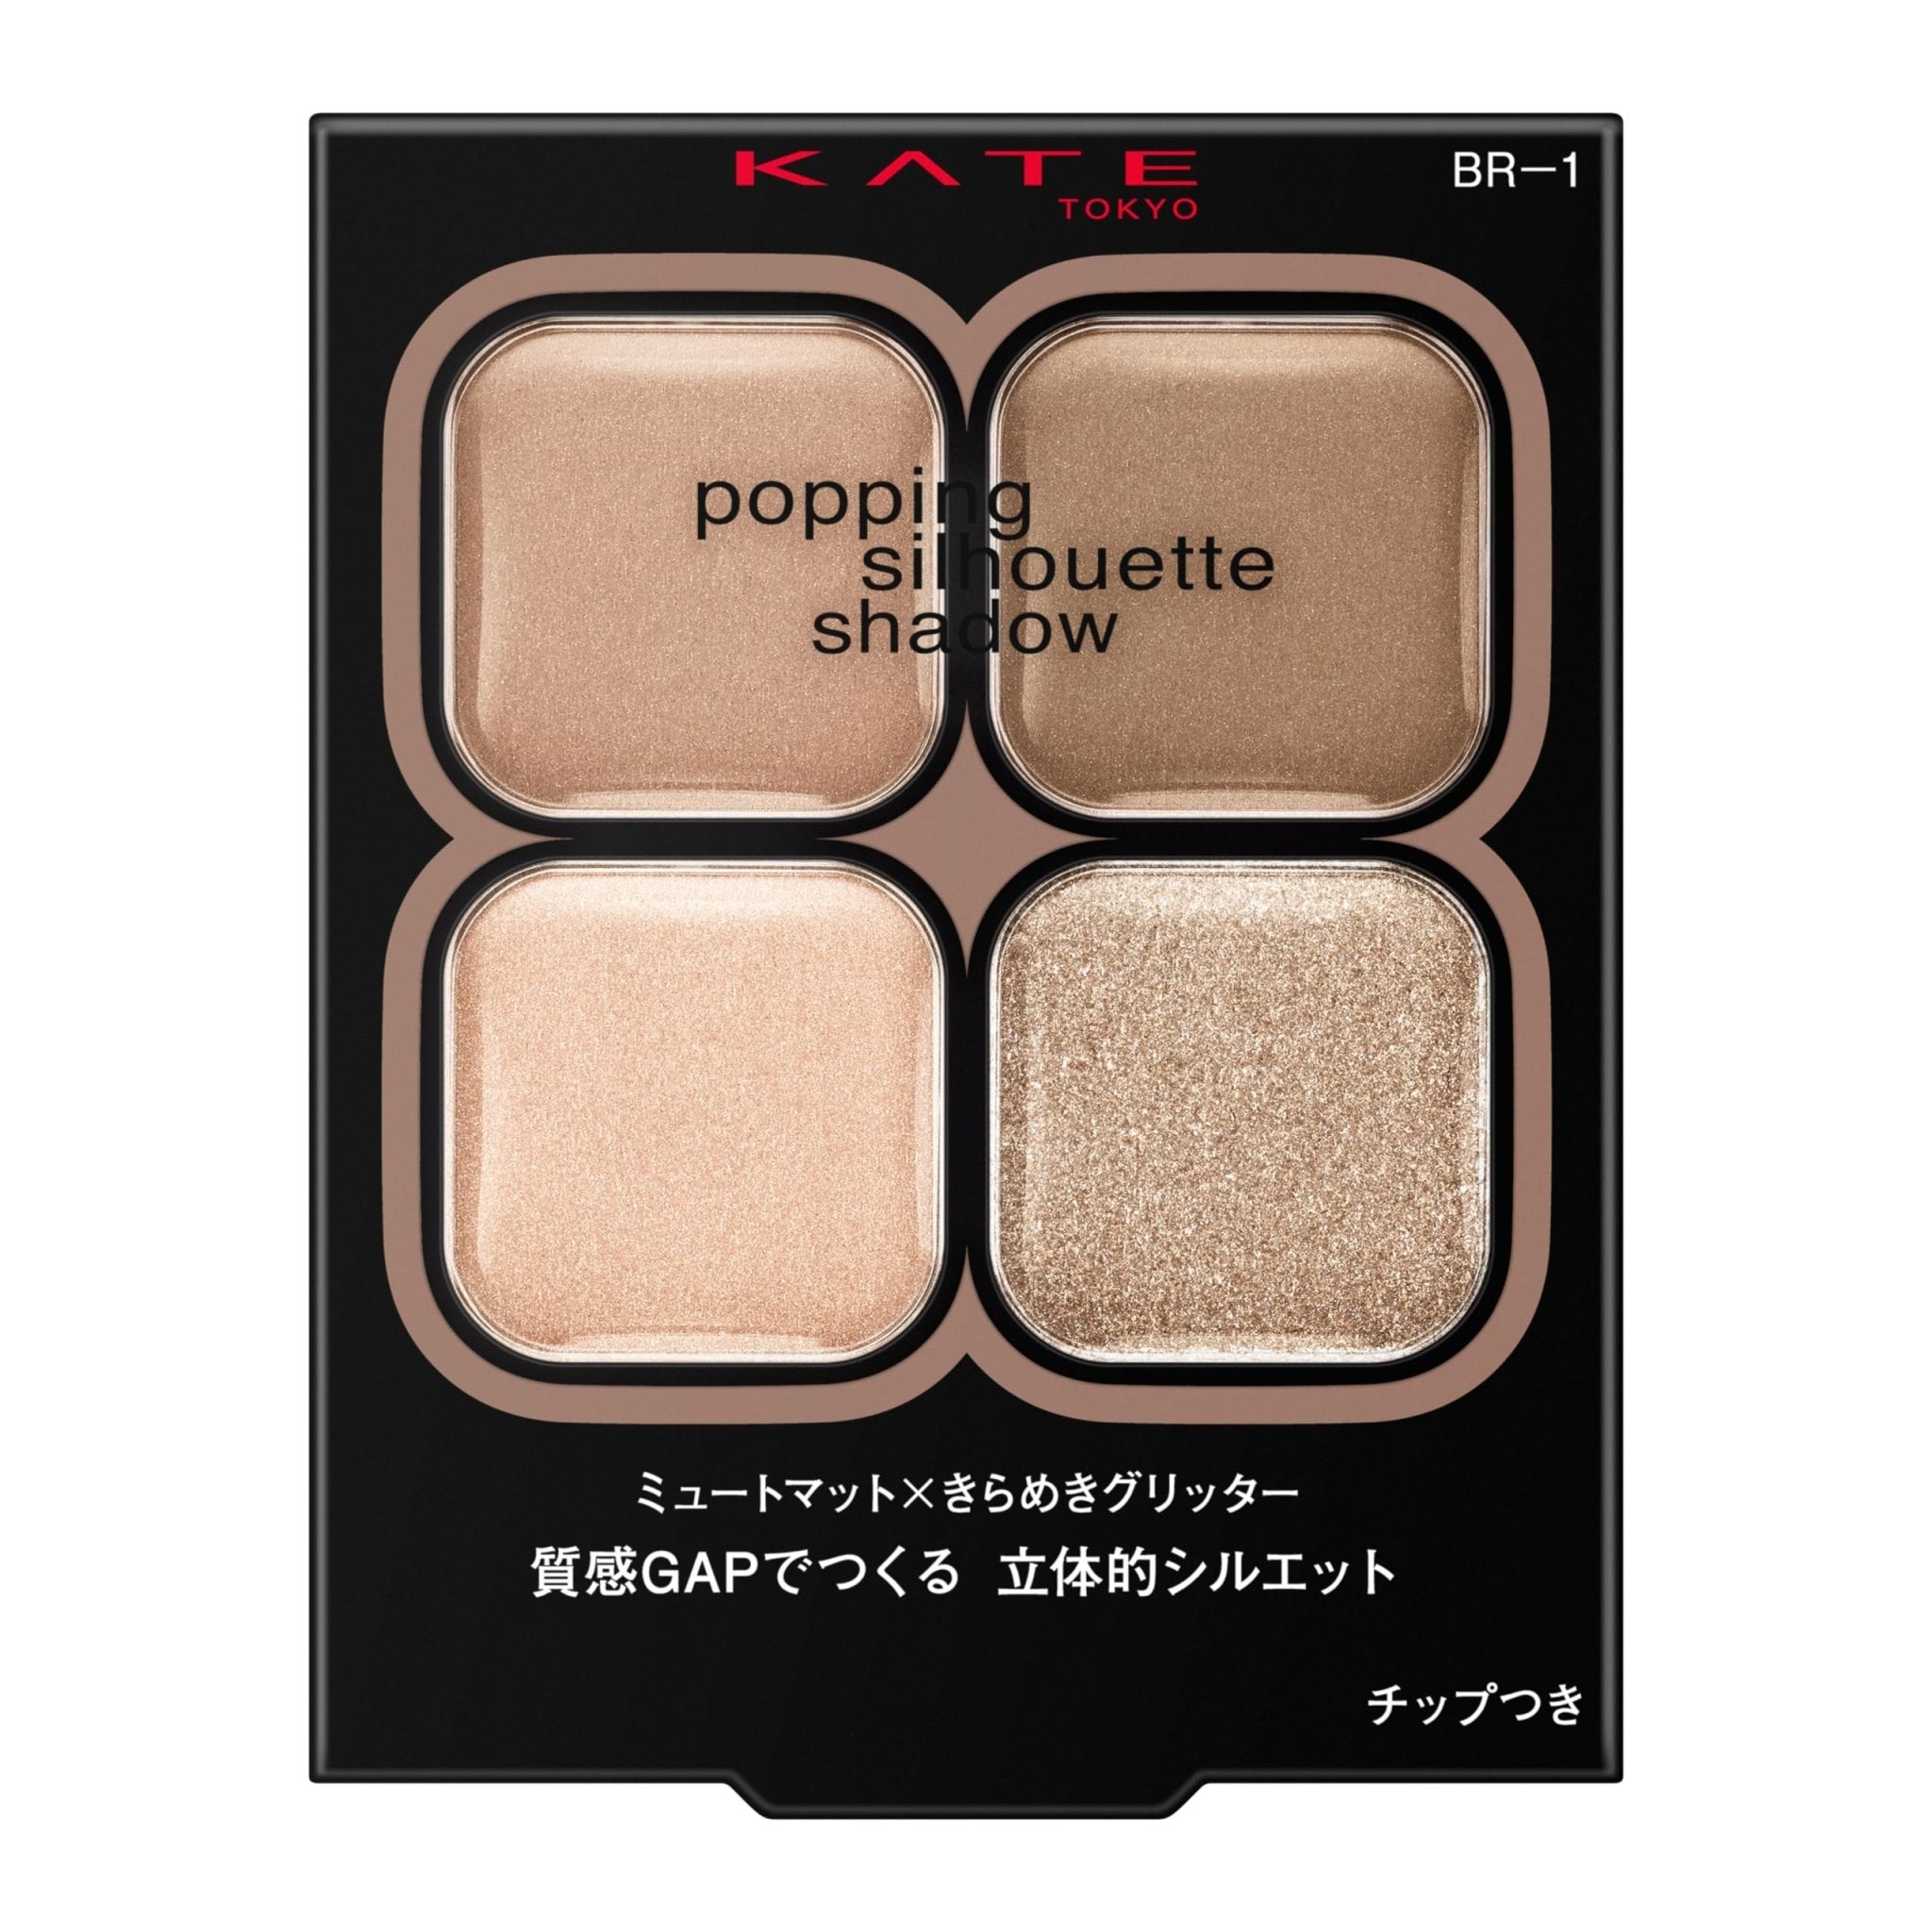 Kate Silhouette Shadow BR - 1: High Impact Long - lasting Popping Color